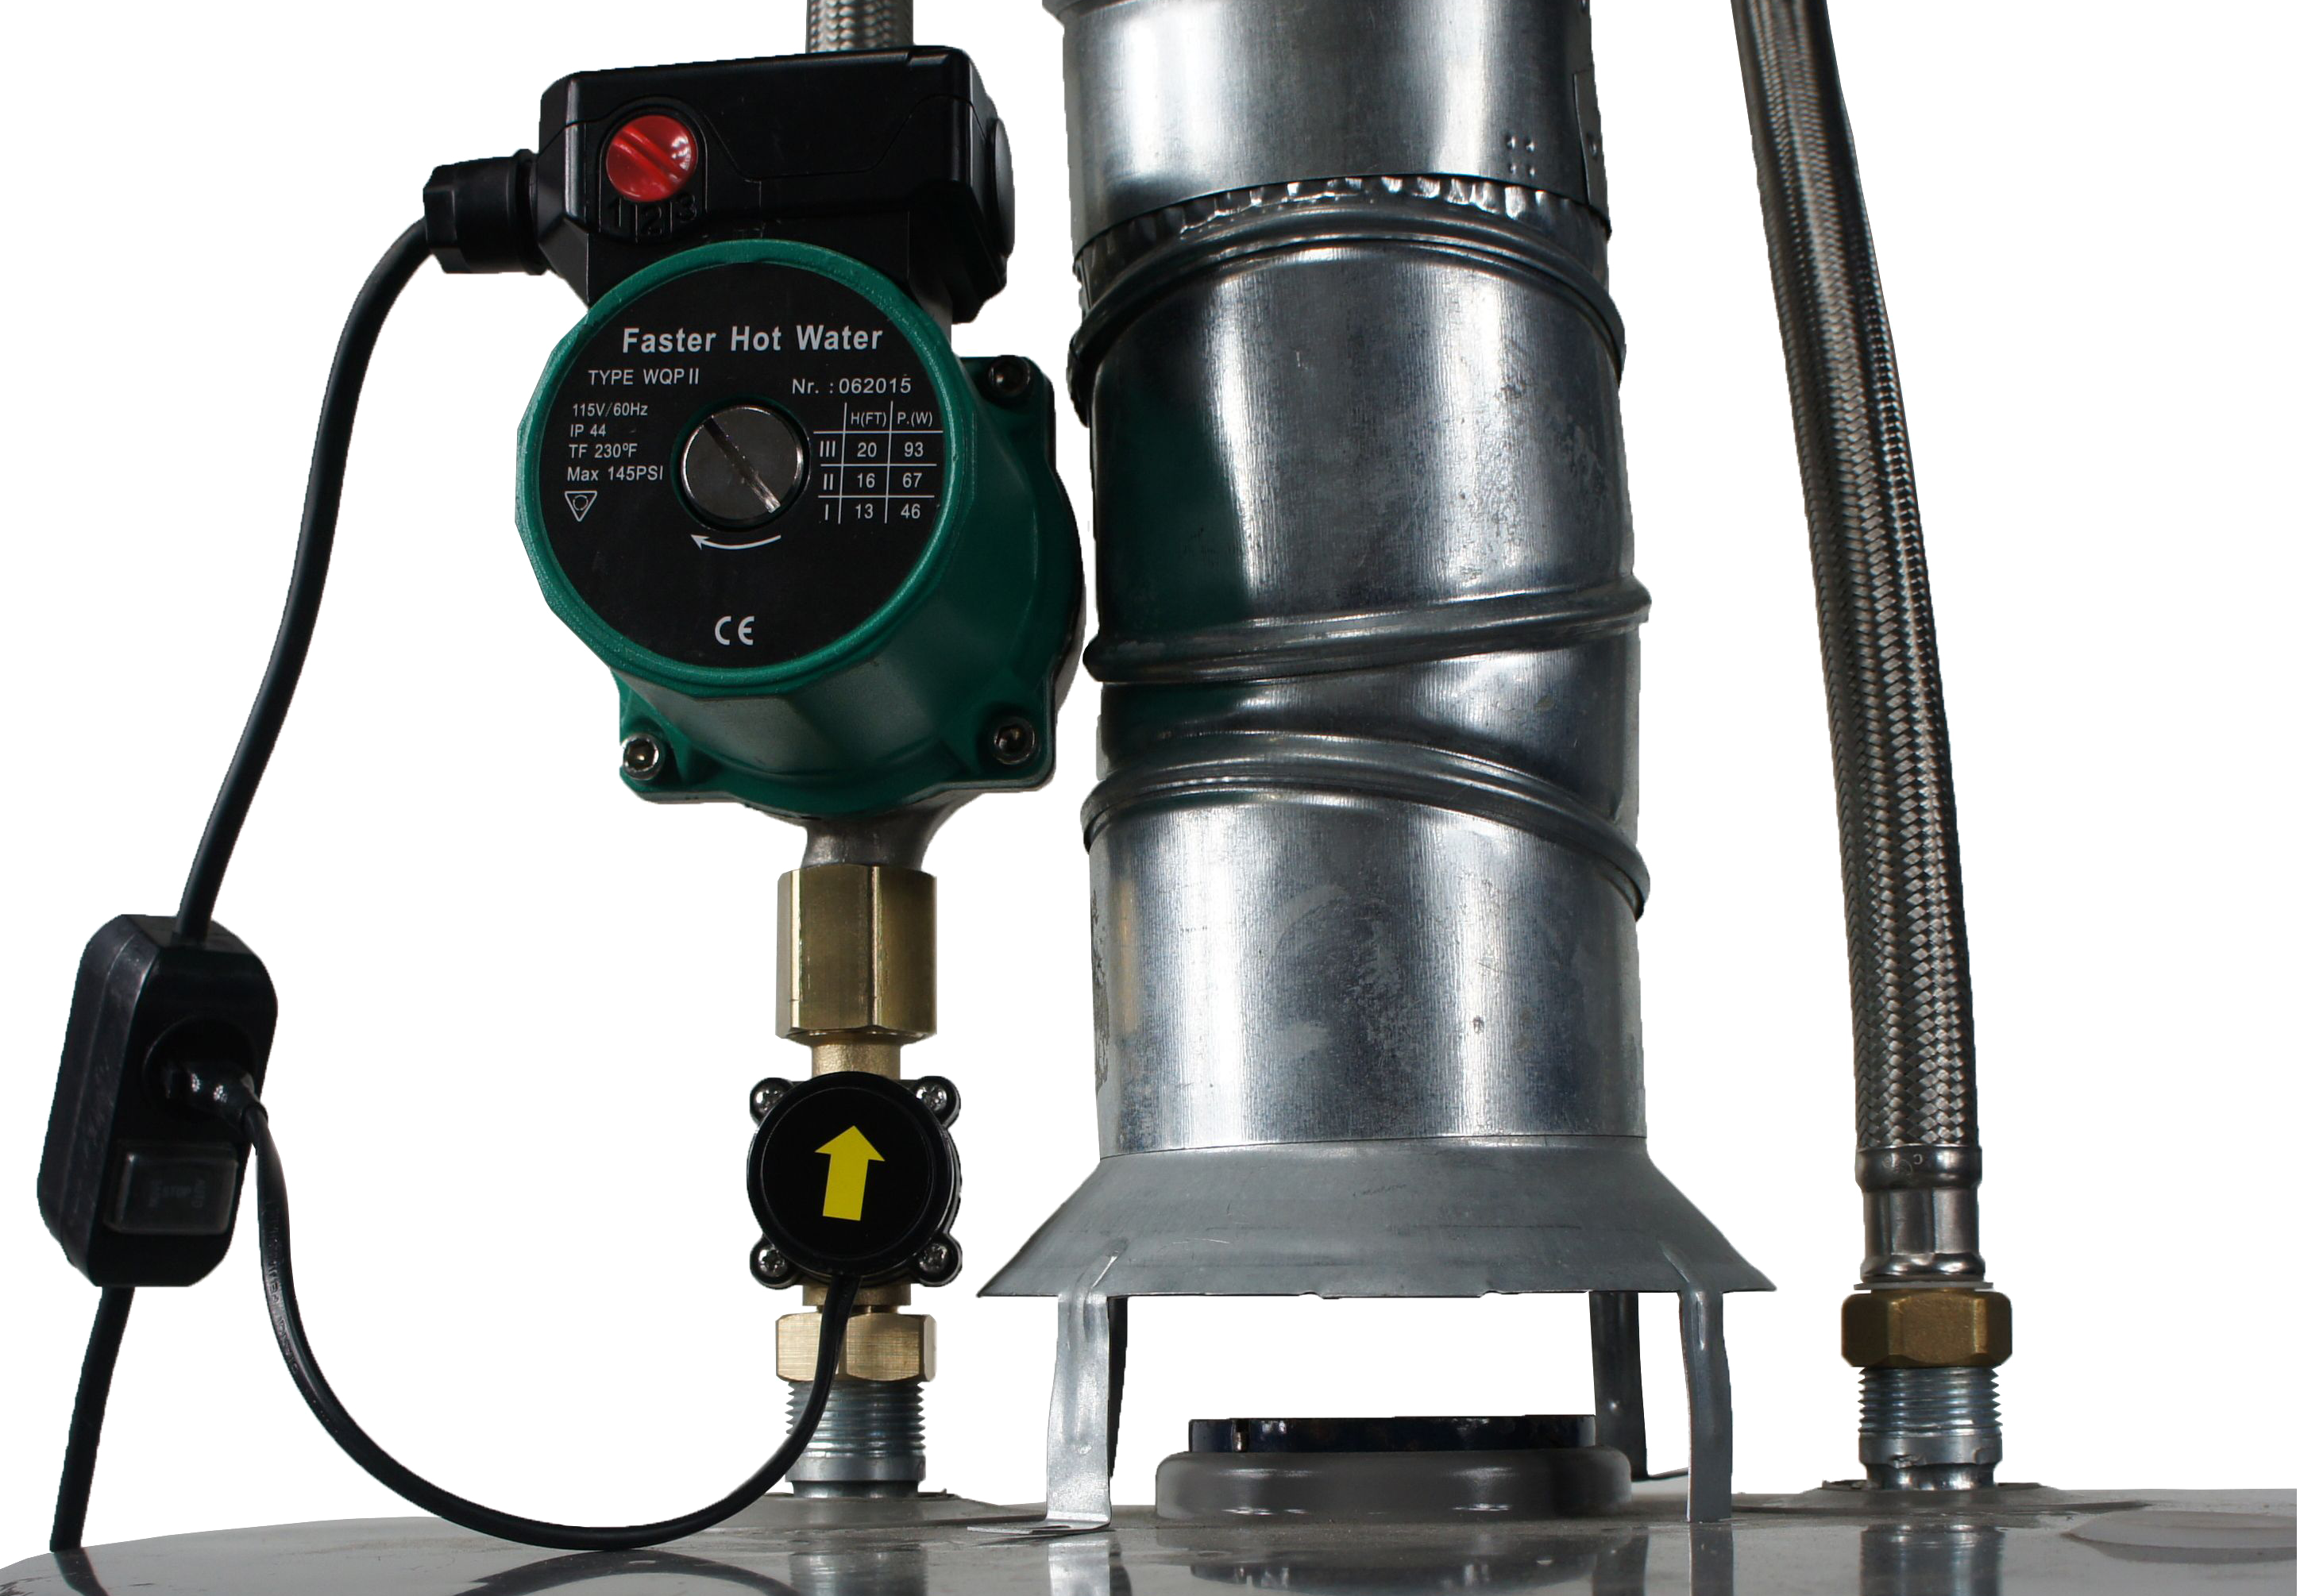 Circulation system for tank water heaters